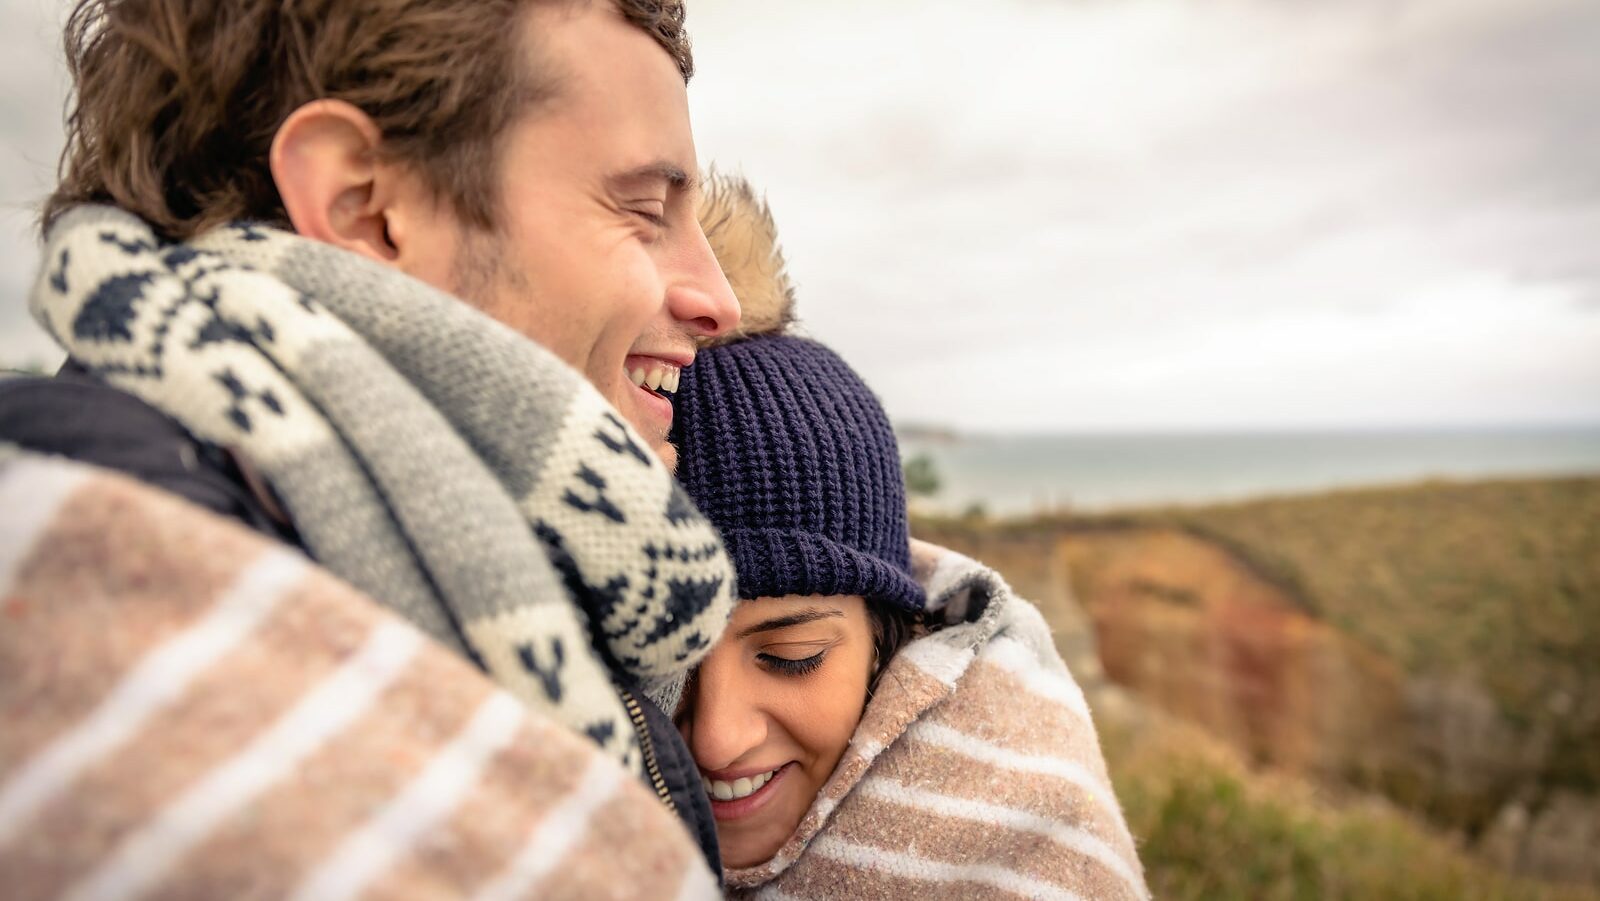 Young couple laughing outdoors under blanket in a cold day